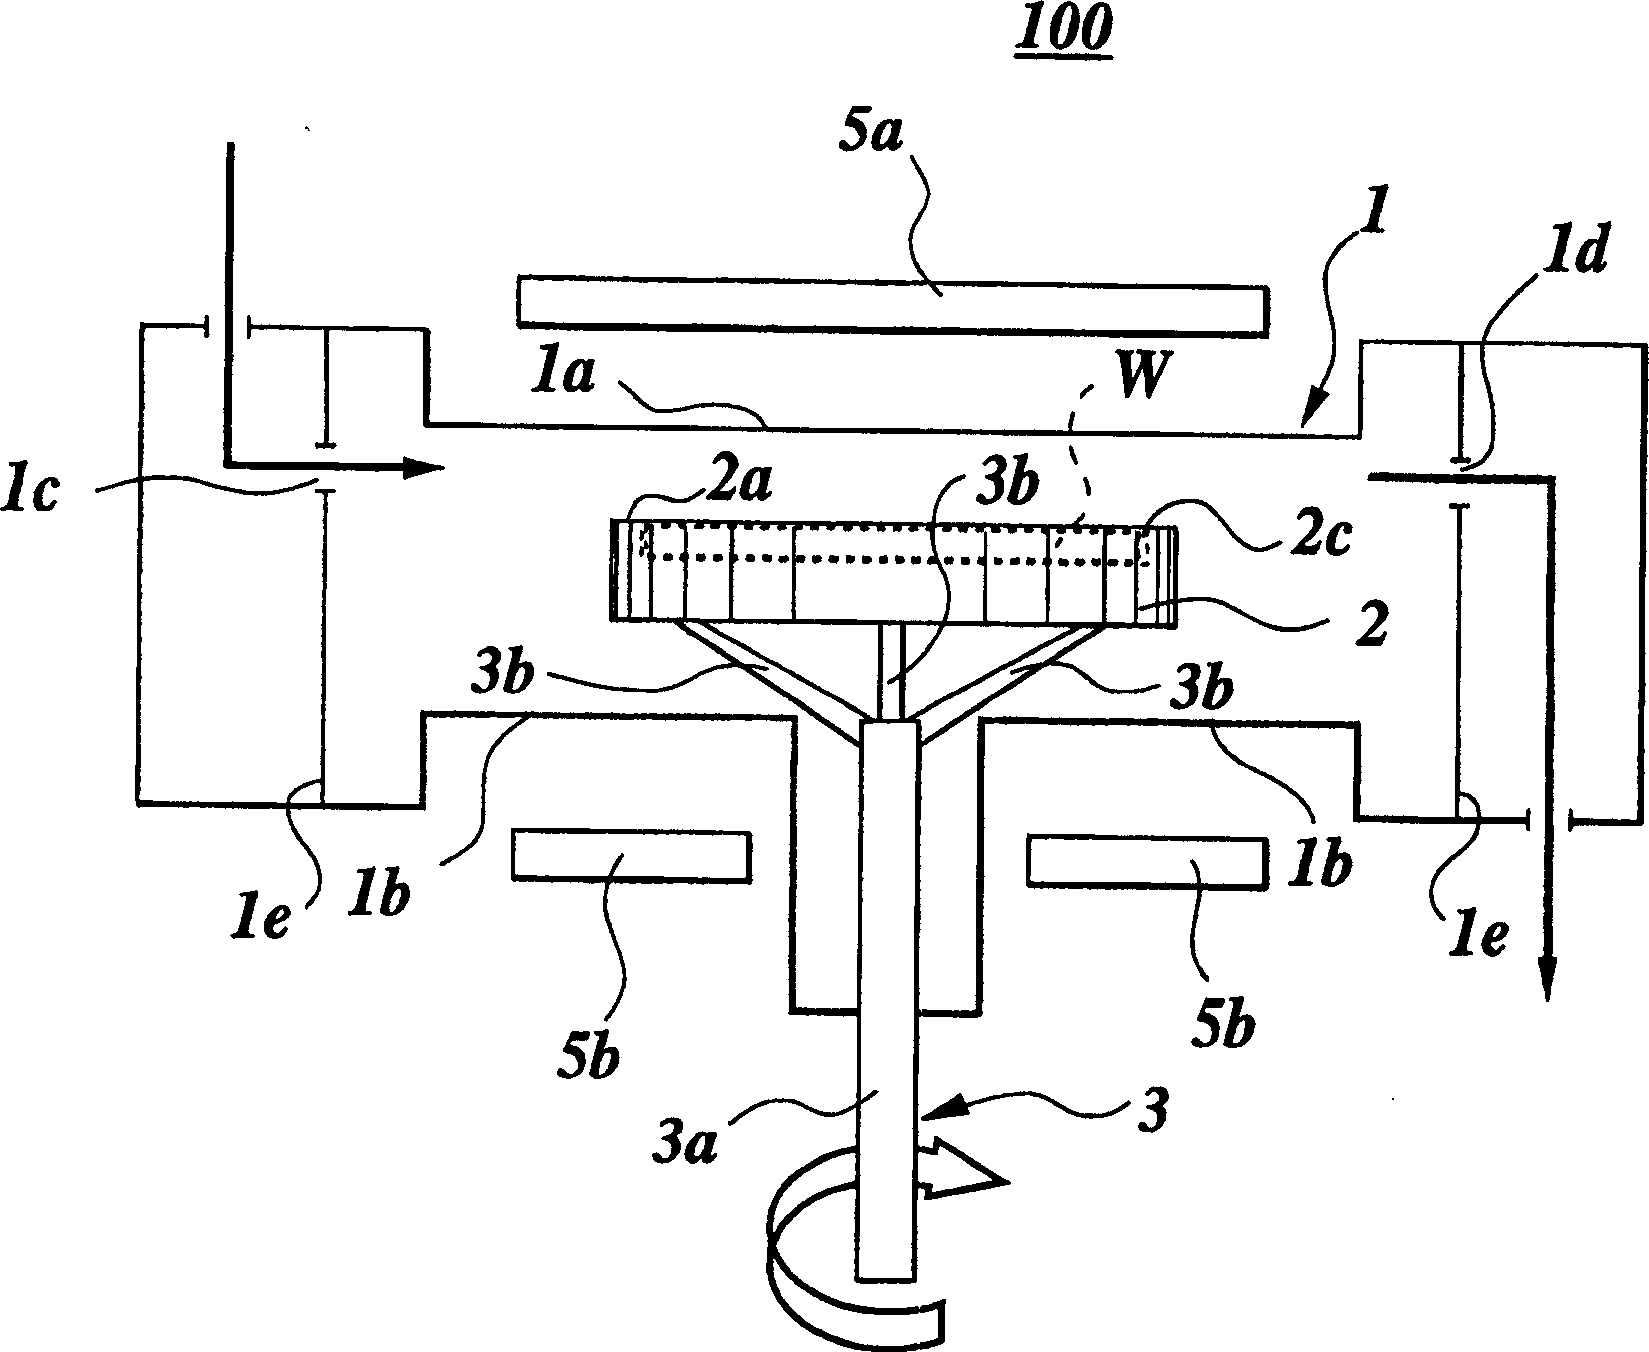 Susceptor and vapor growth device